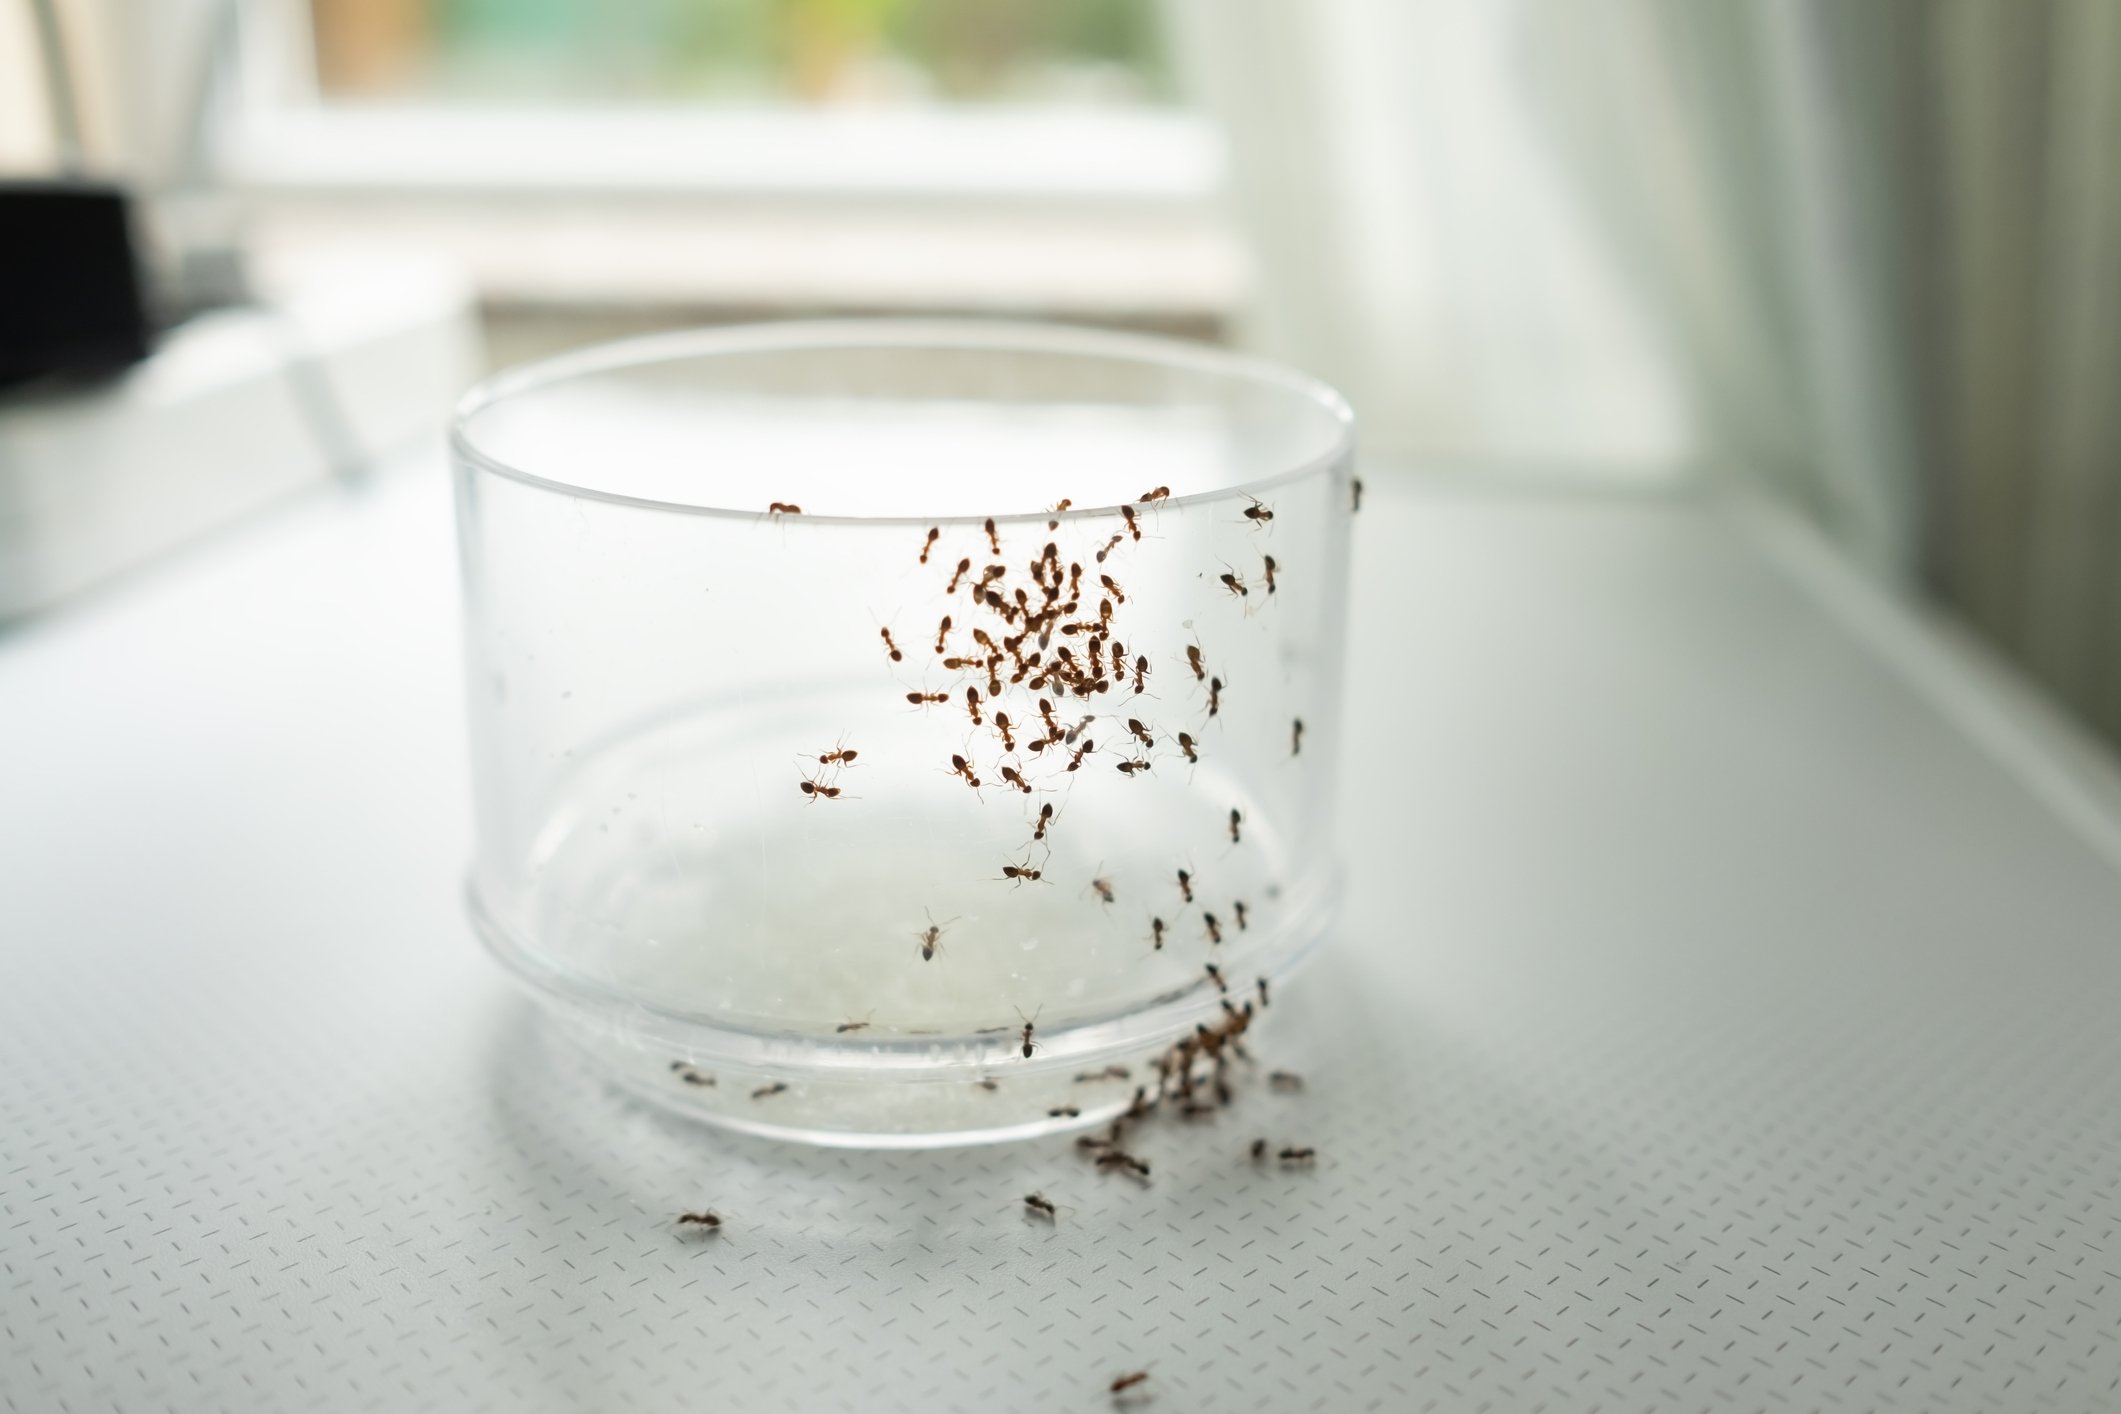 Ants on climbing on an empty glass cup on the kitchen counter